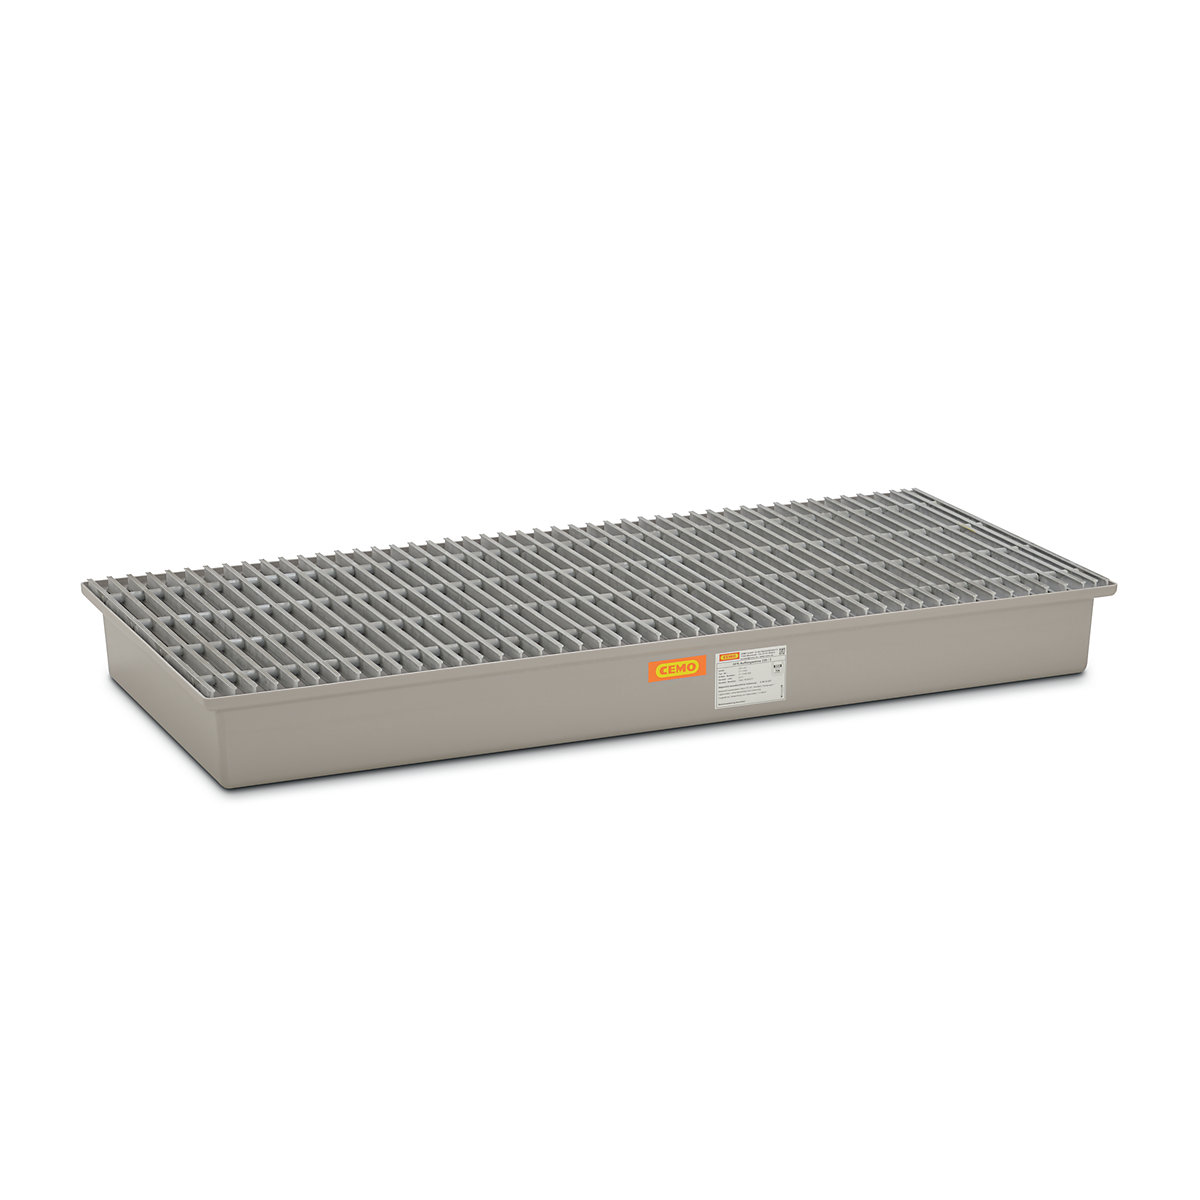 GRP base sump tray – CEMO, 3 x 200 litre drums, with certification, with GRP grate-5